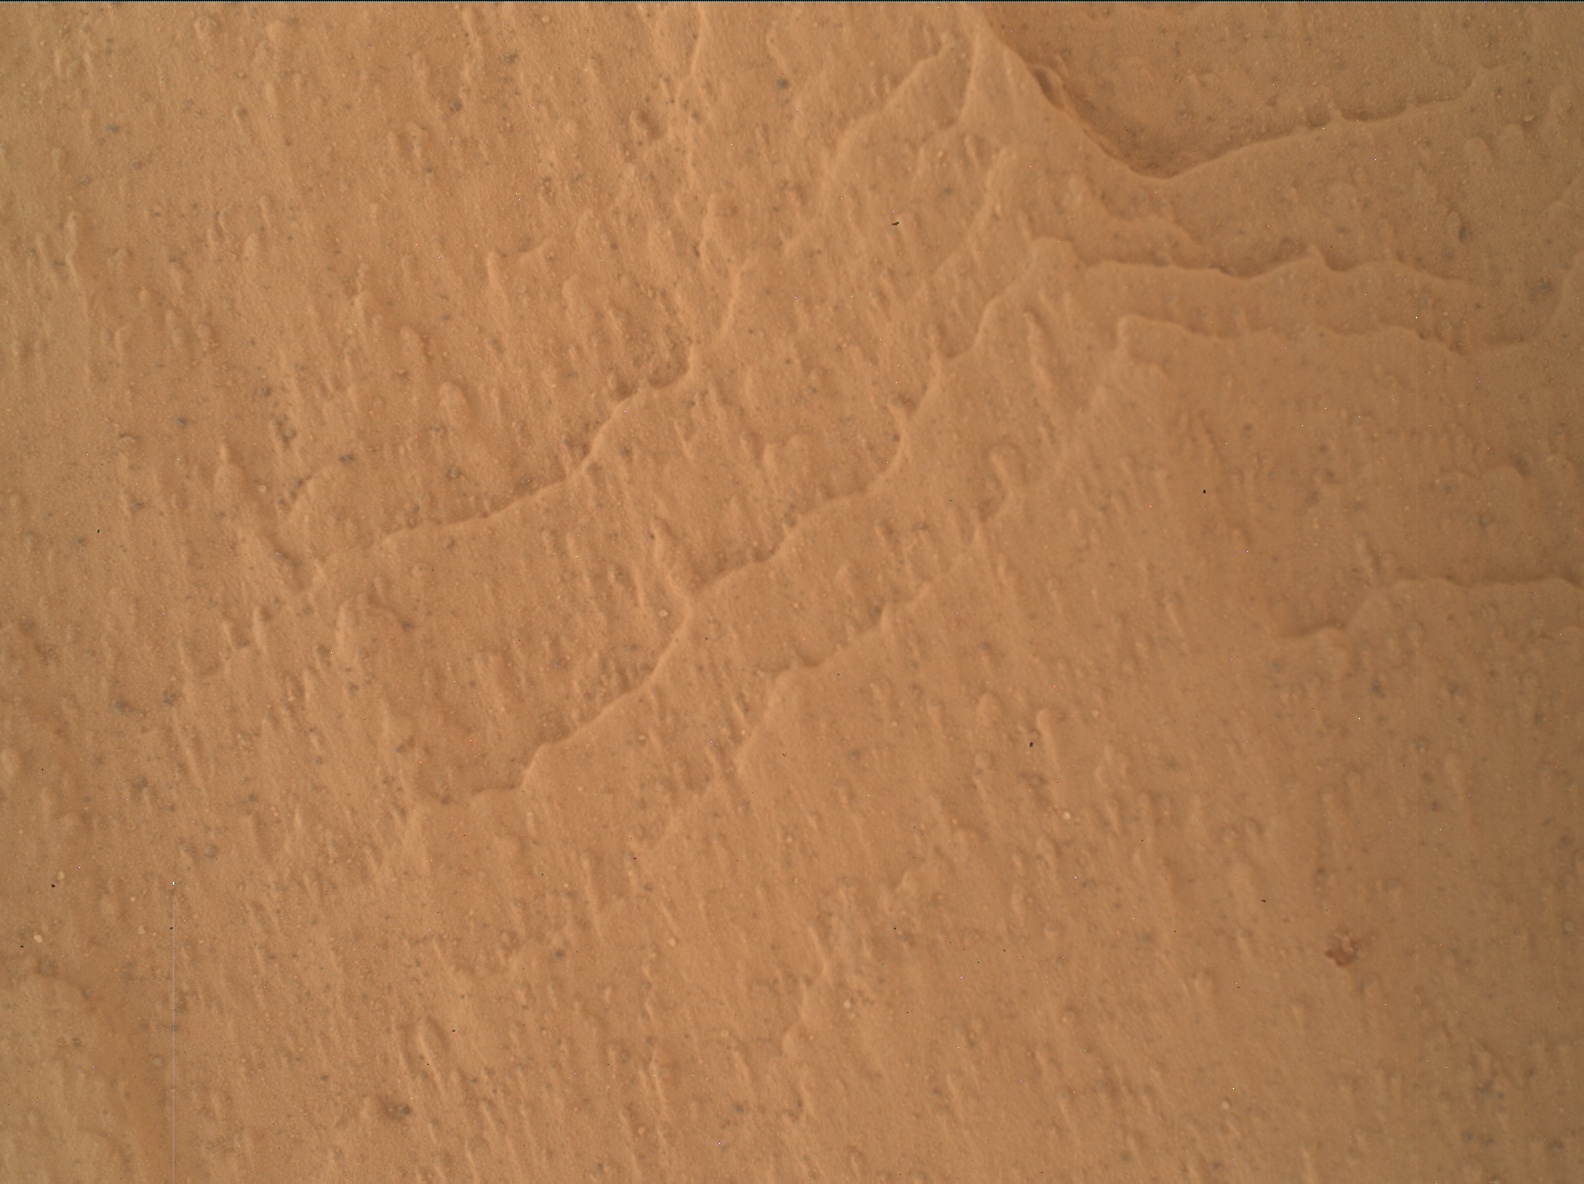 Nasa's Mars rover Curiosity acquired this image using its Mars Hand Lens Imager (MAHLI) on Sol 3286